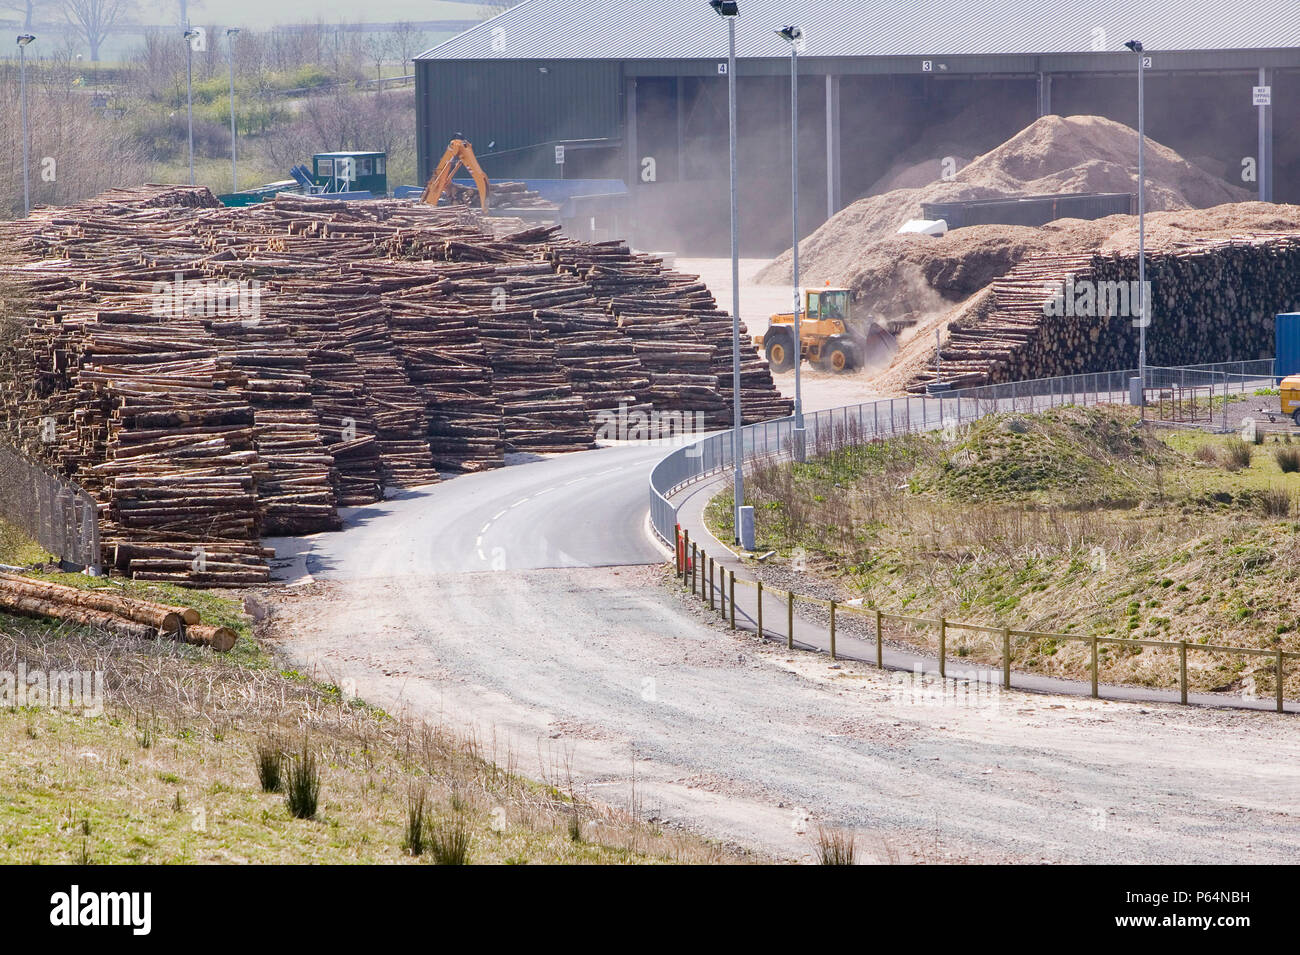 E.ON's biofuel power station in Lockerbie Scotland with timber supplies.The power station is fuelled 100% by wood sourced from local woodlands and gen Stock Photo